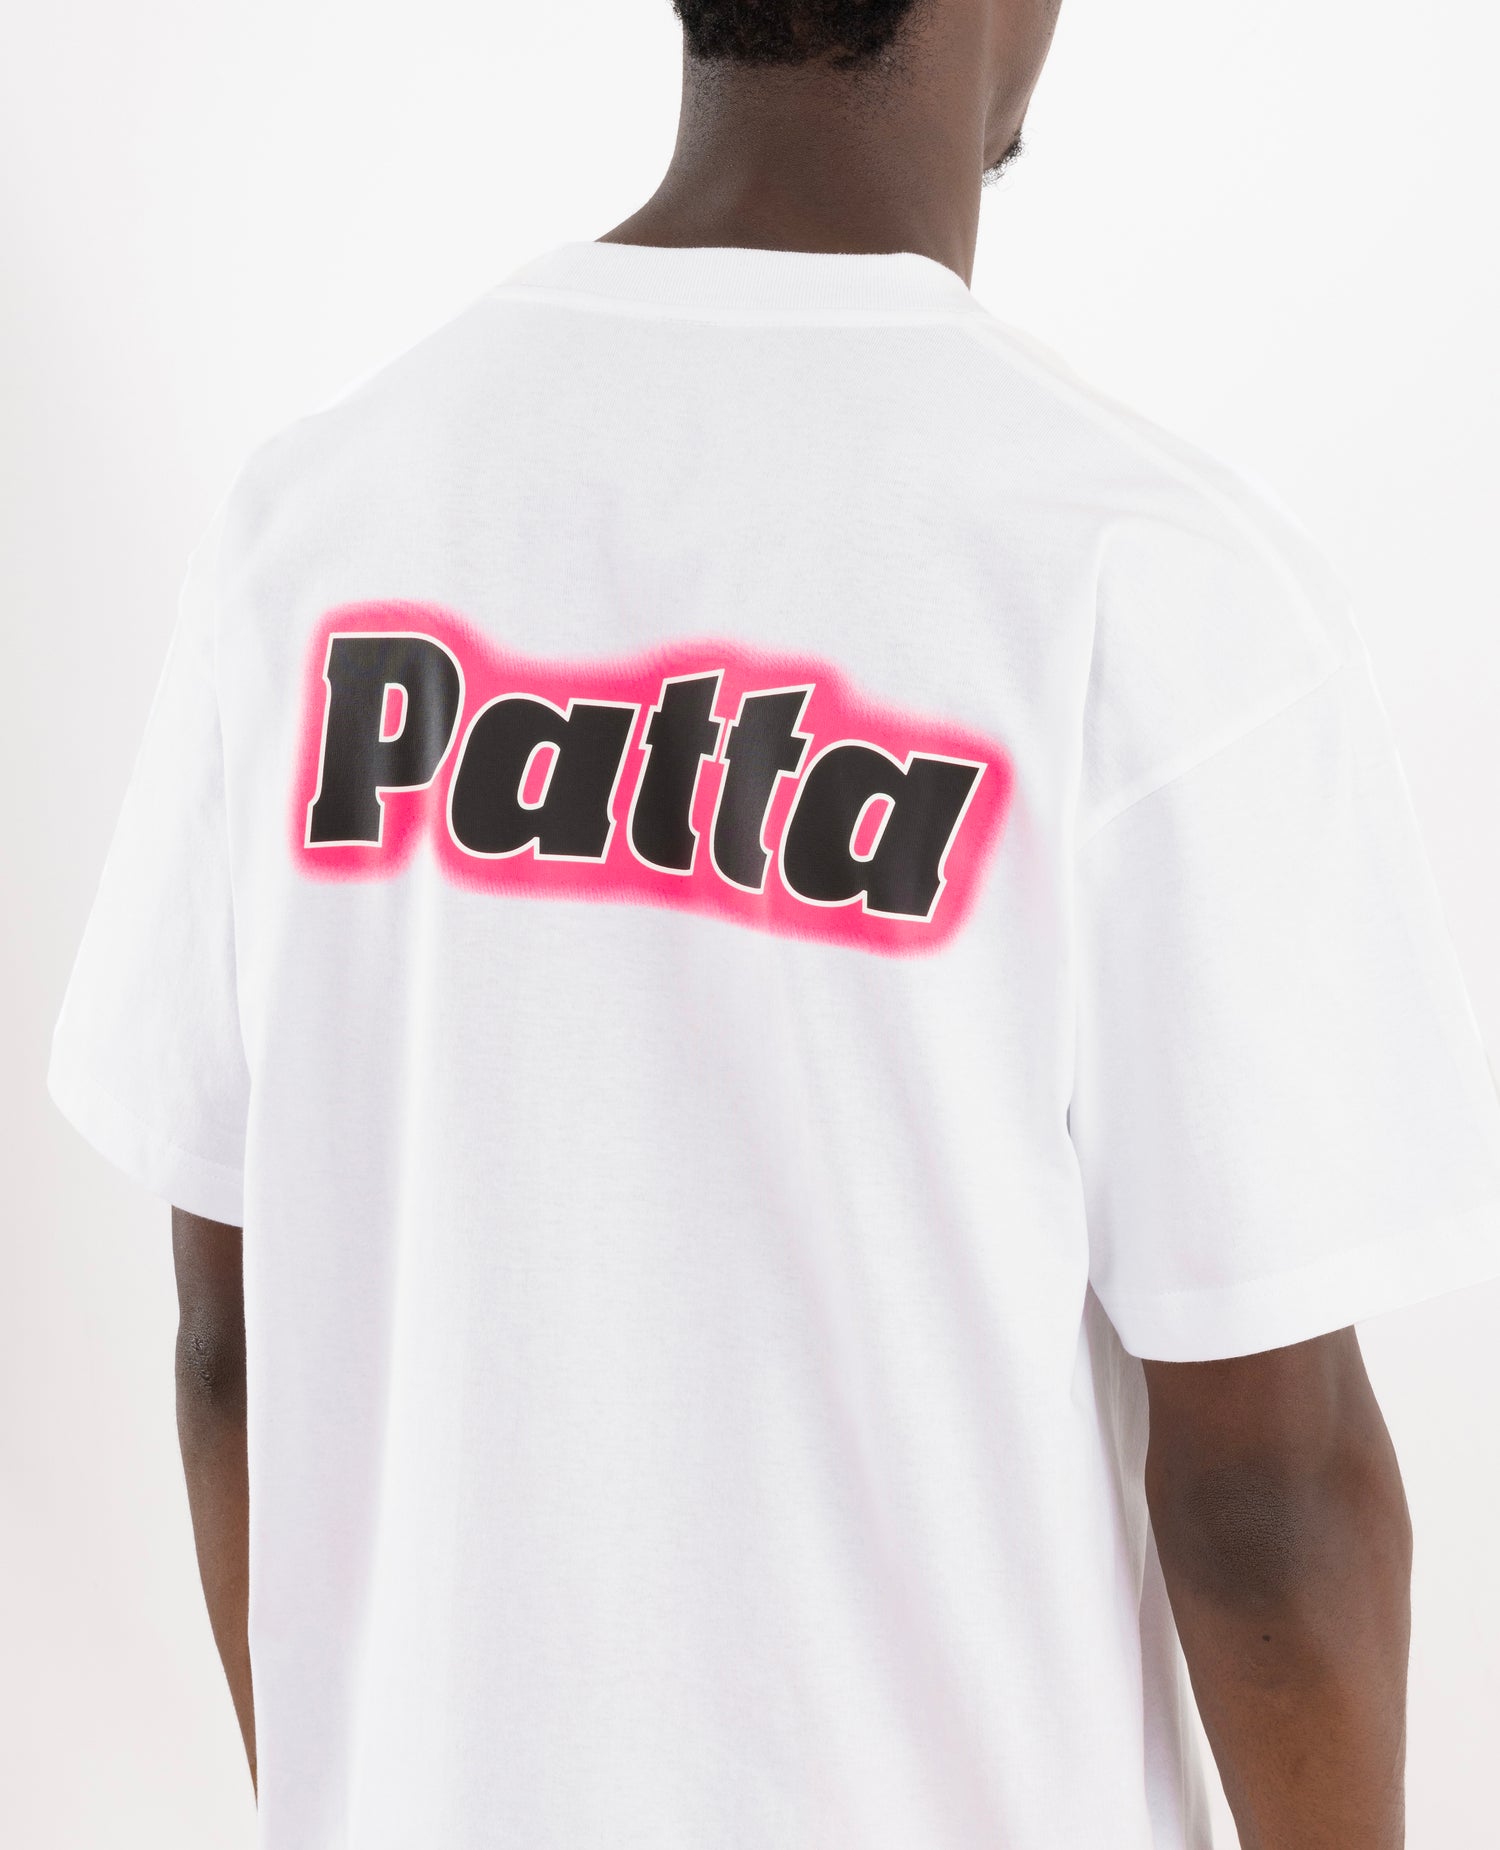 T-shirt Patta It Does Matter What You Think (Blanc)